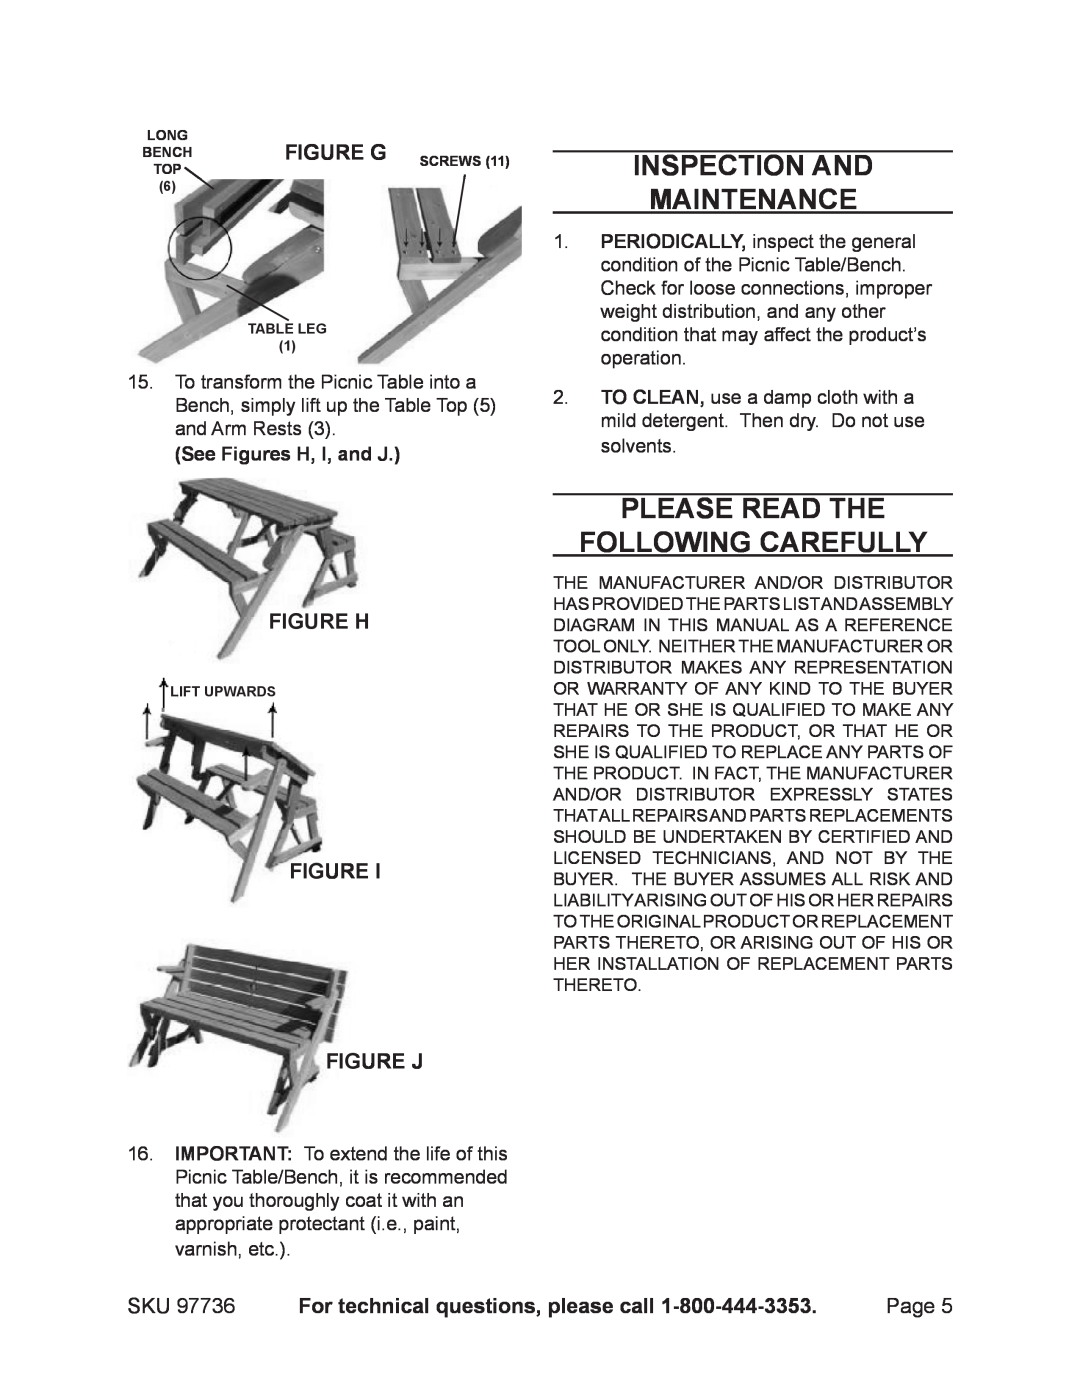 Harbor Freight Tools 97736 manual INSPECTION and MAINTENANCE, Please Read The Following Carefully, Figure H, Figure J 